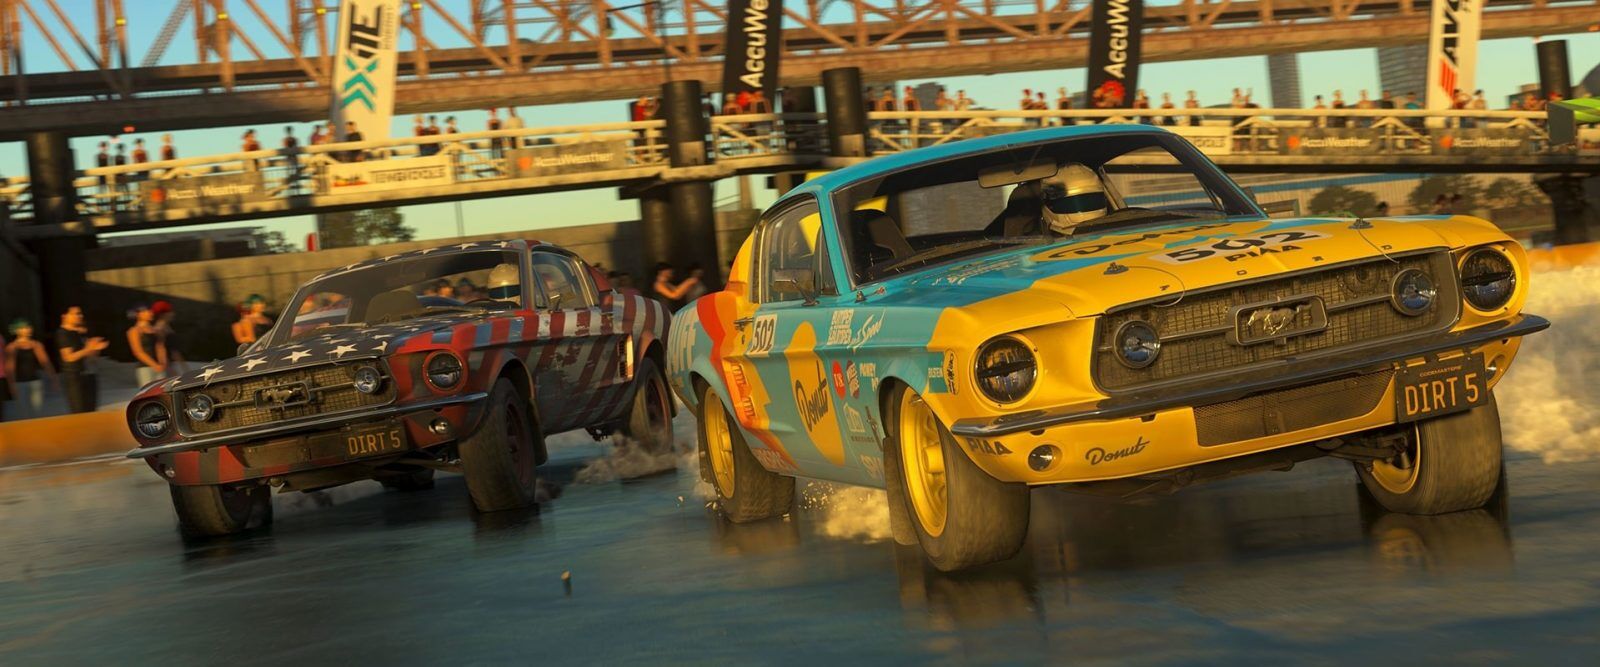 Uproar in DIRT 5: Massive content update for rally fans